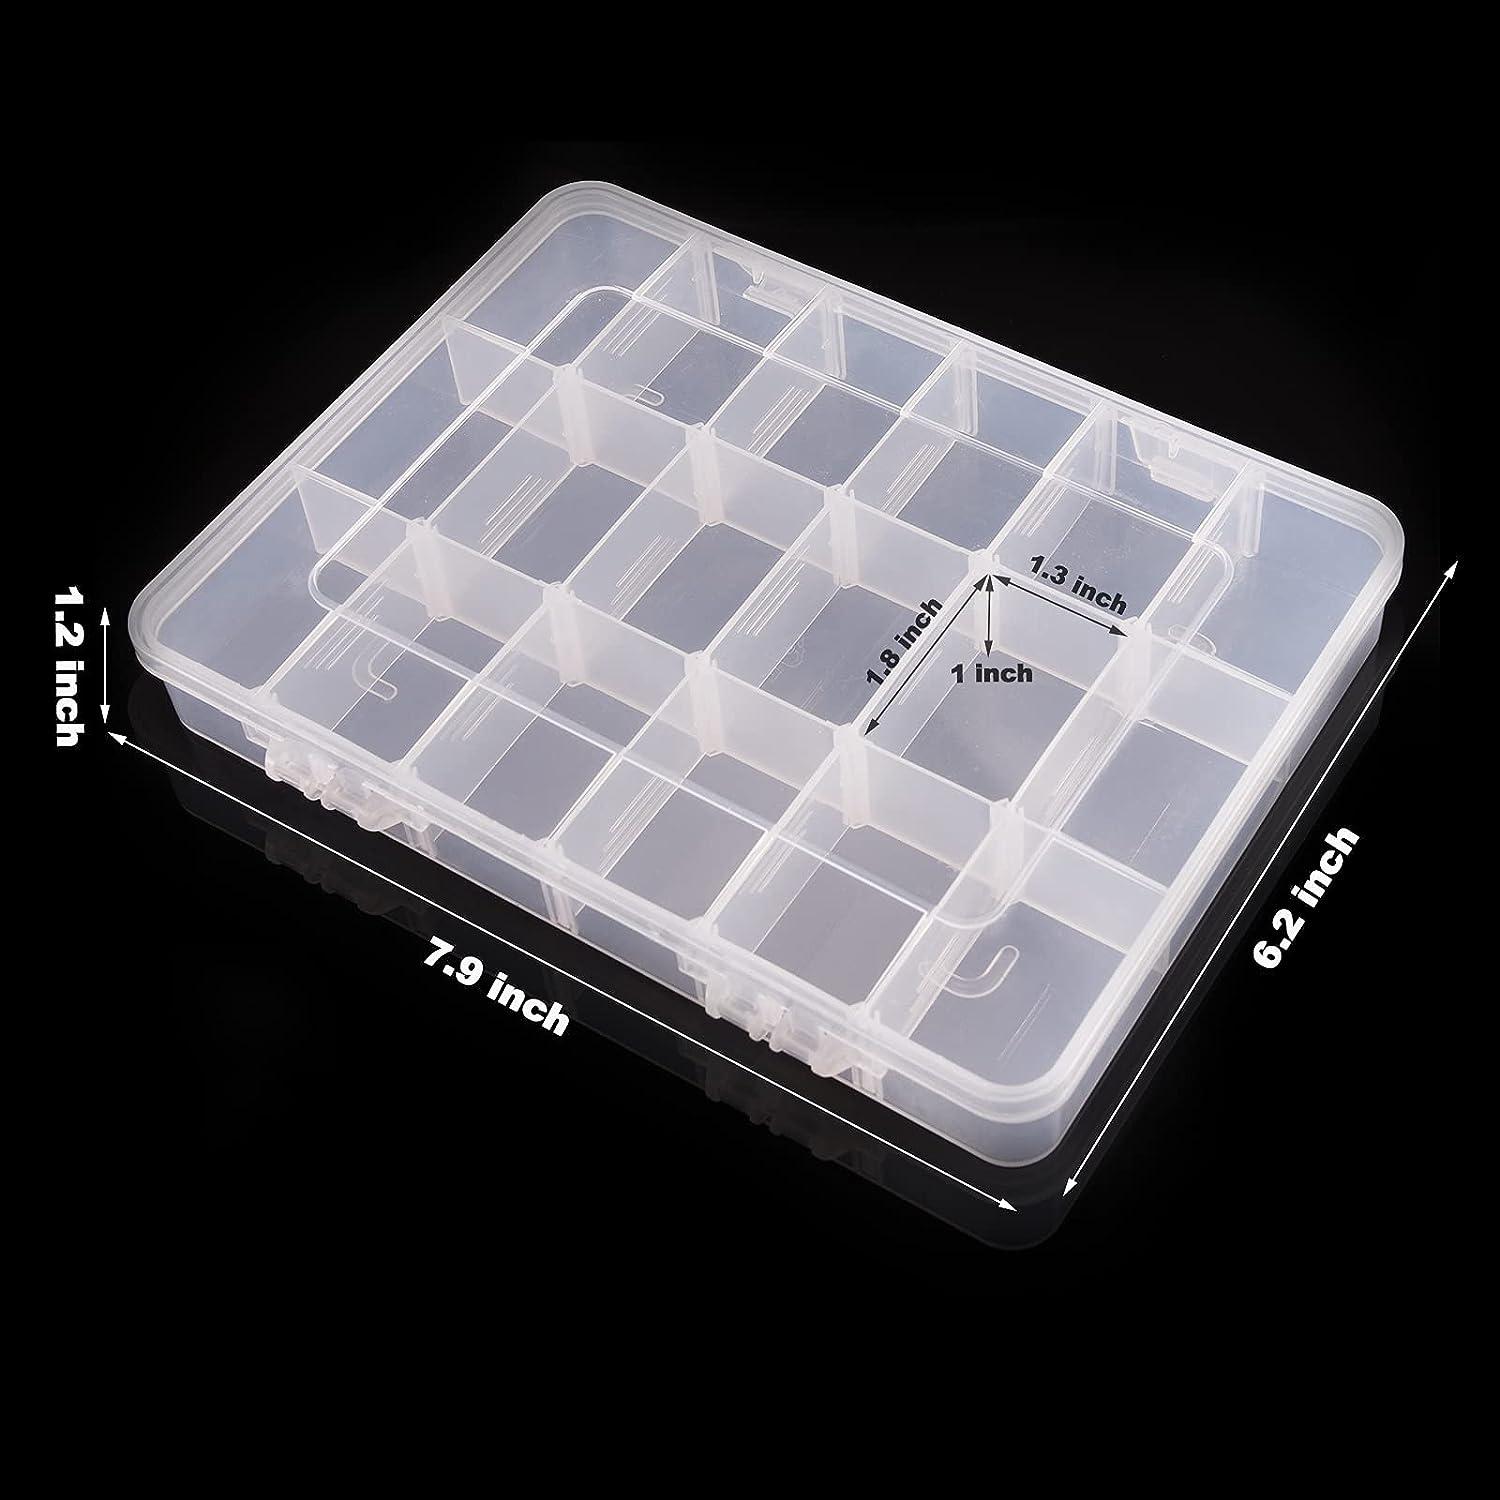 18 Grids Plastic Organizer Box with Dividers, Exptolii Clear Compartment  Container Storage for Beads Crafts Jewelry Fishing Tackles, Size 7.9 x 6.2  x